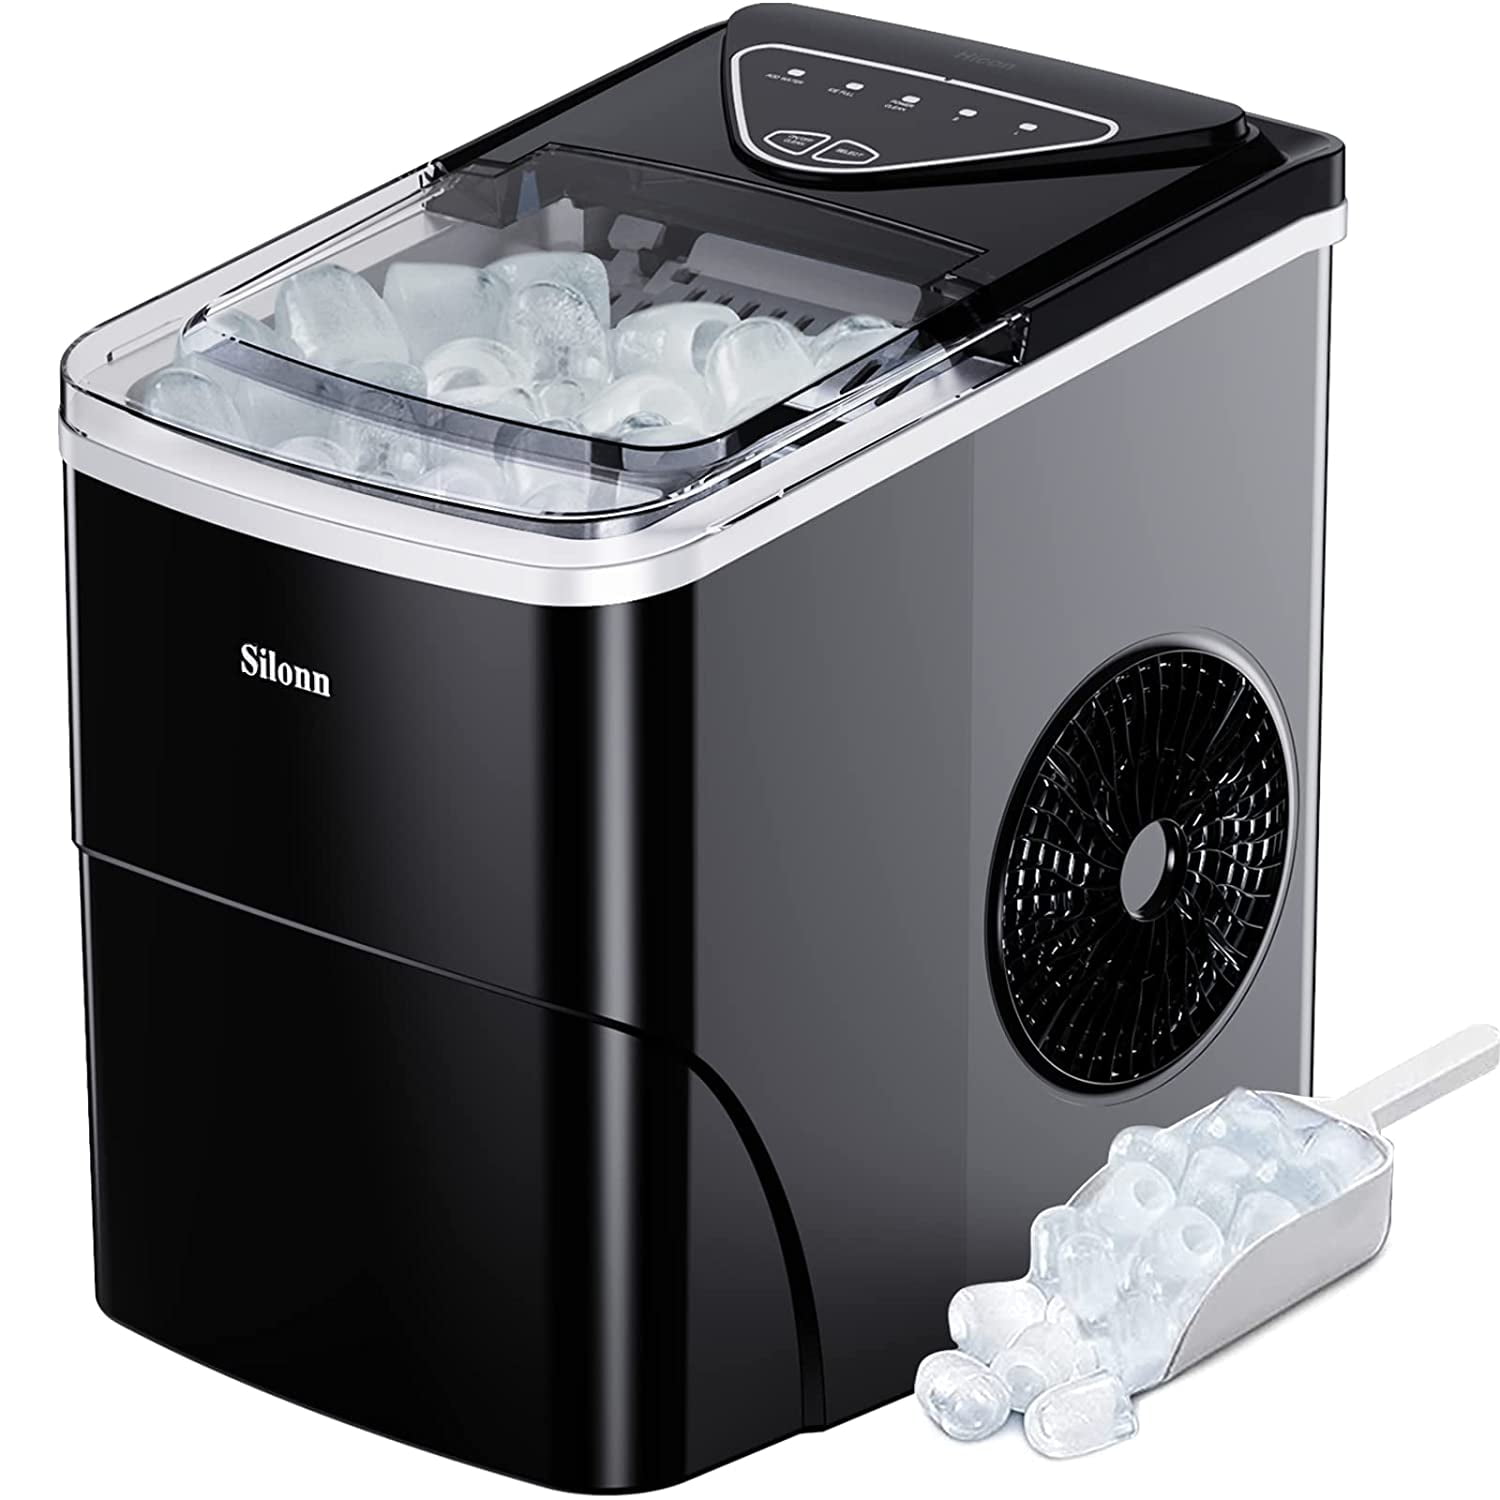  Silonn Countertop Ice Maker Machine, Portable with Handle, Ice  Scoop and Basket, Makes up to 27 lbs. of Ice Per Day, 9 Cubes in 7 Mins,  Green, 12 x 9 x 12 inches (SLIM06) : Appliances